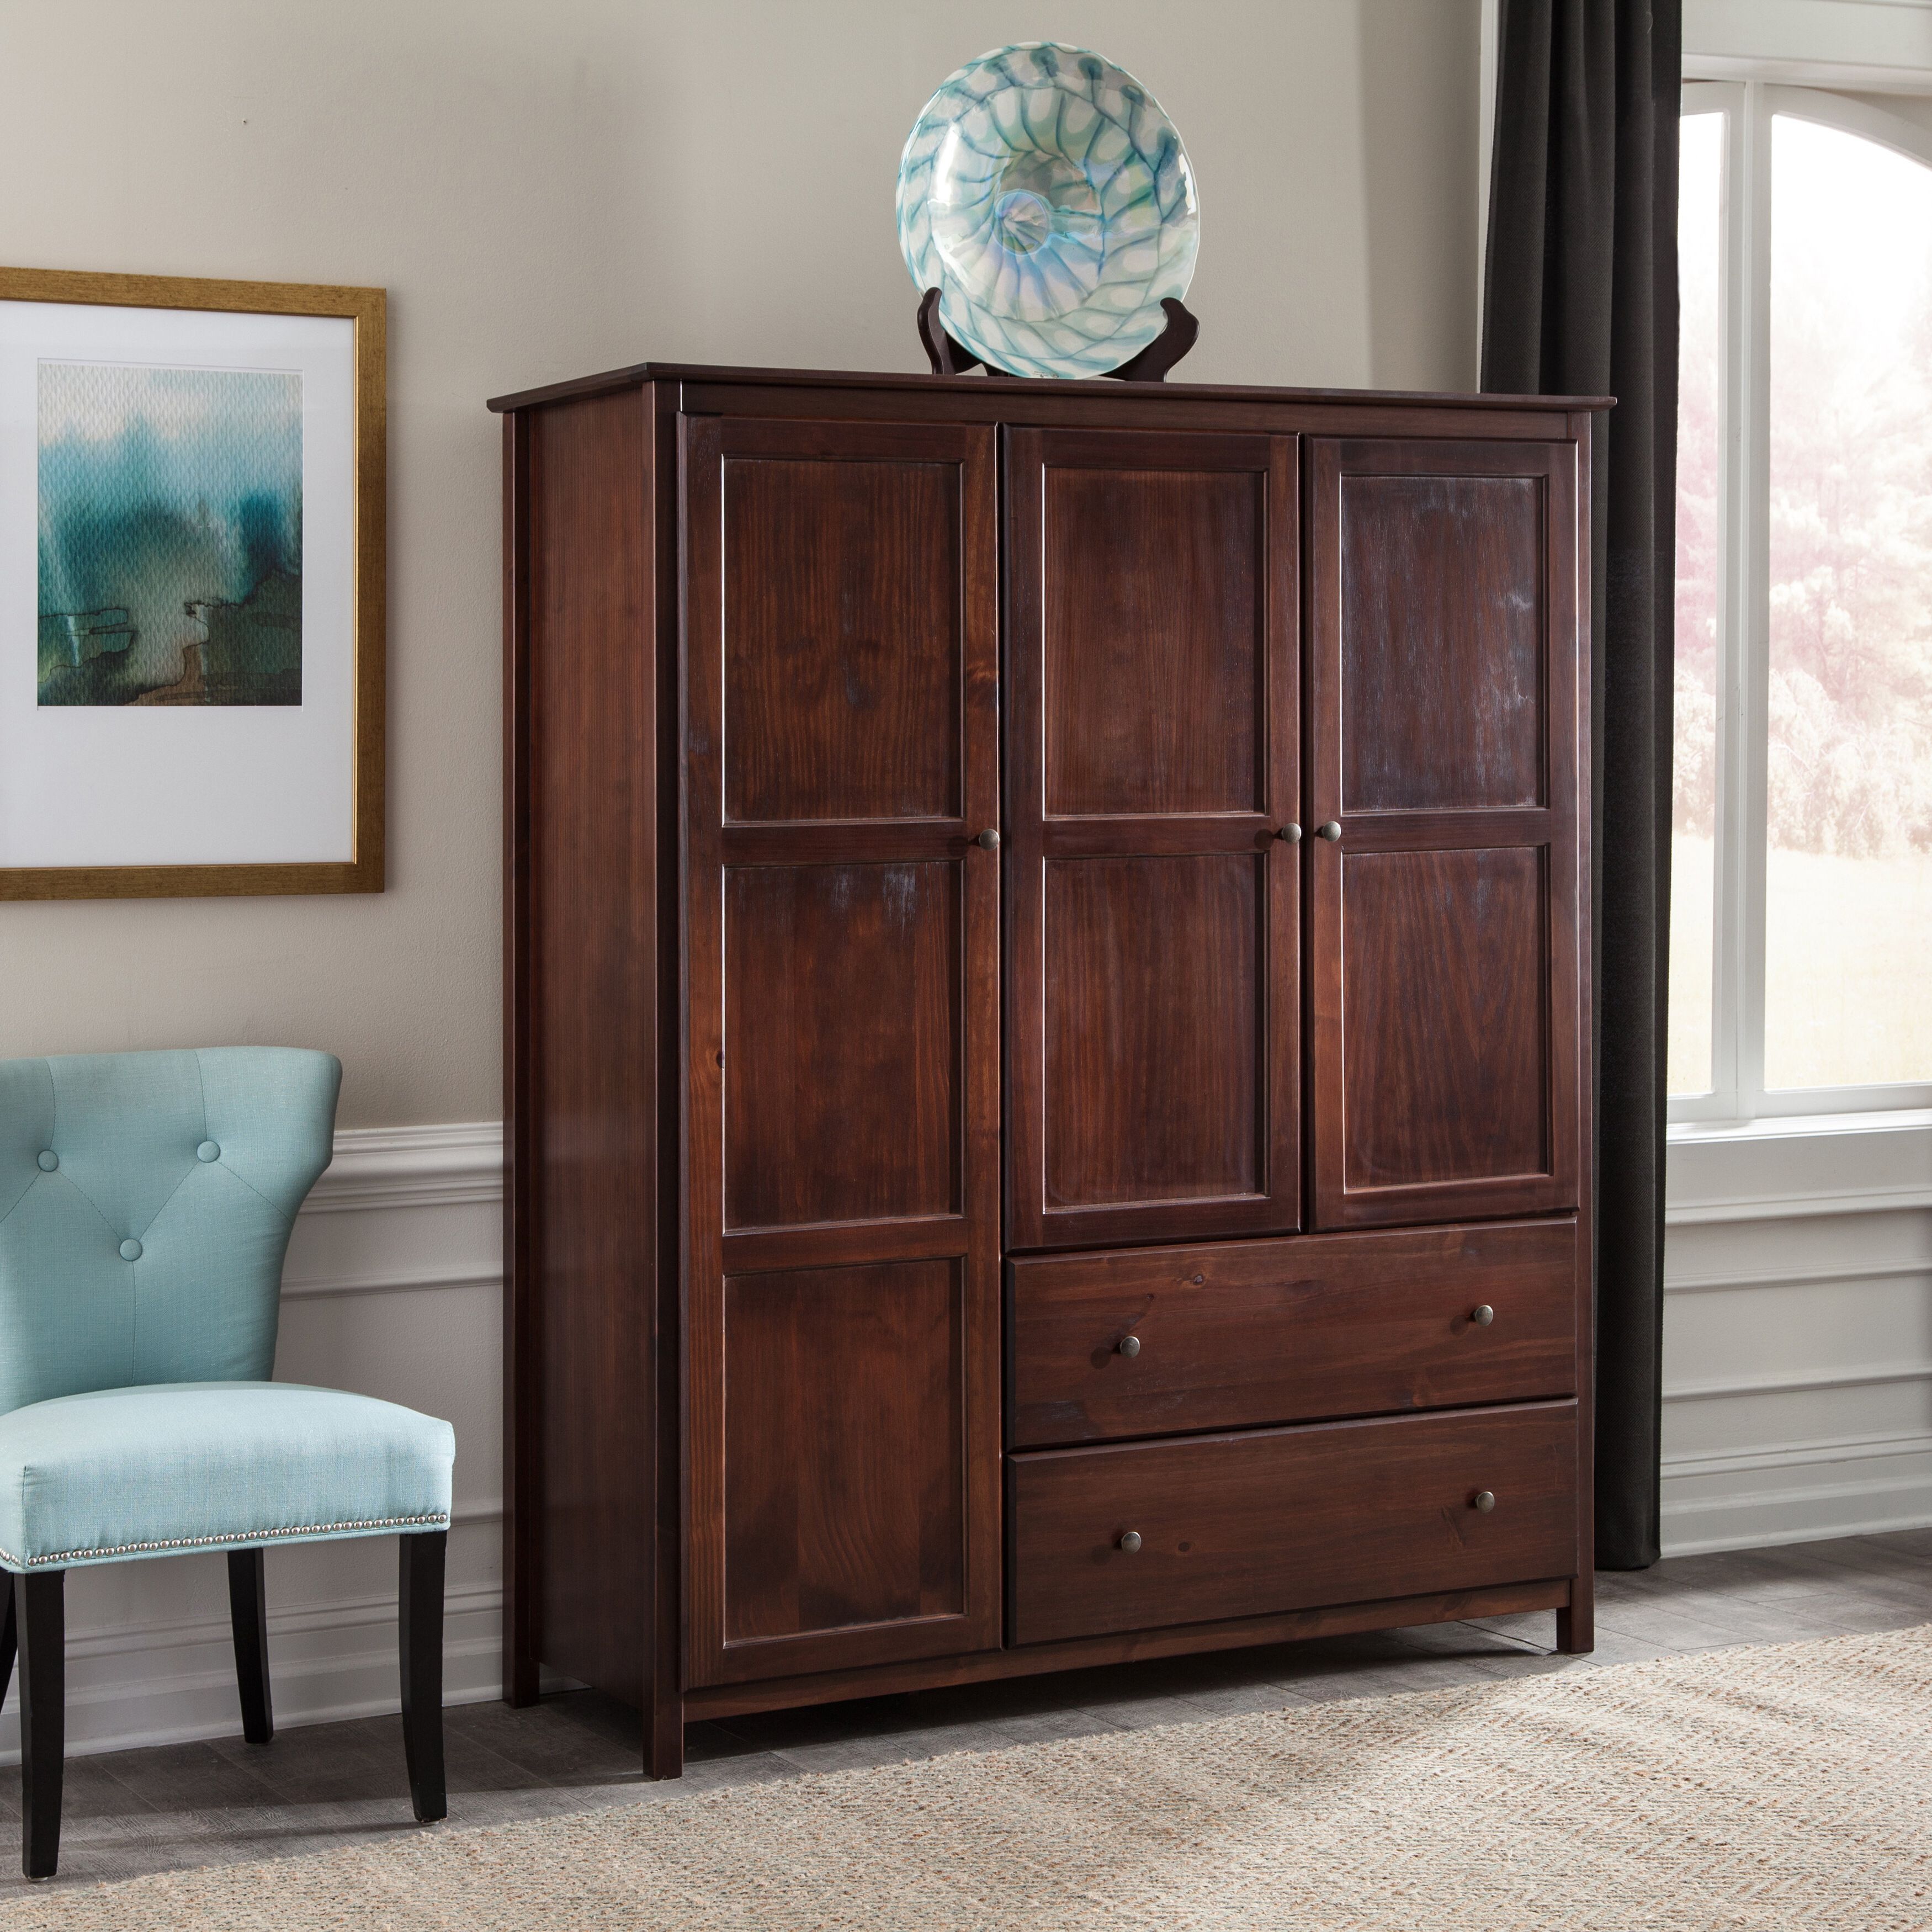 Grain Wood Furniture Shaker Solid Wood Armoire & Reviews | Wayfair With Wardrobes In Cherry (View 16 of 20)